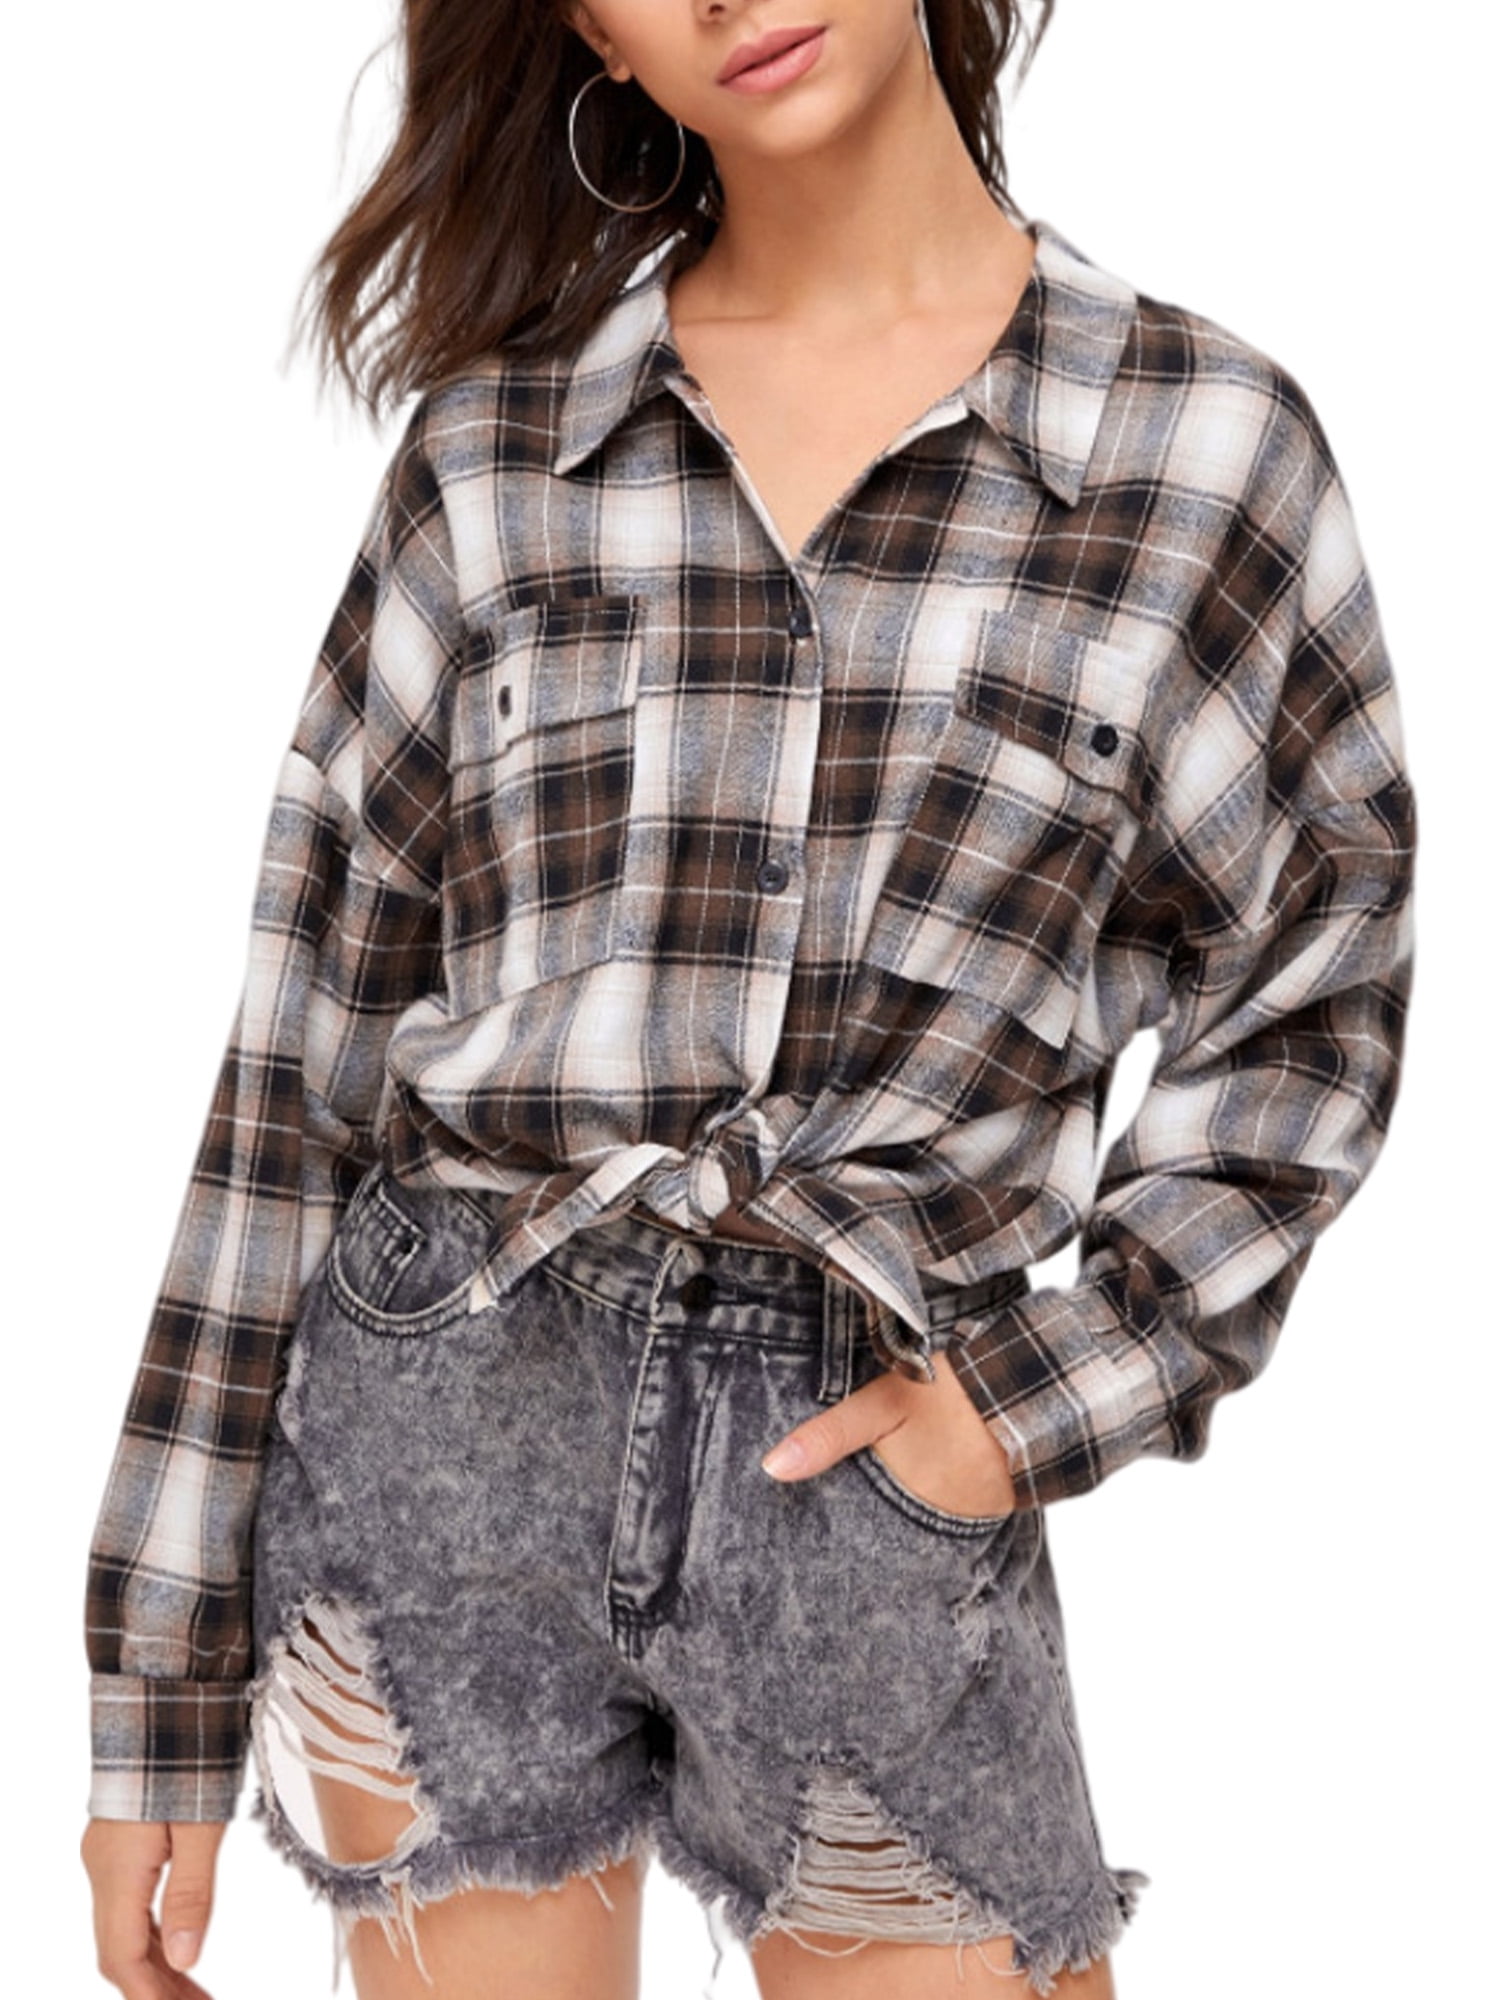 Bsubseach Long Sleeve Jacket with Pocket Plaid Color Block Buttoned Casual Shirts Outerwear